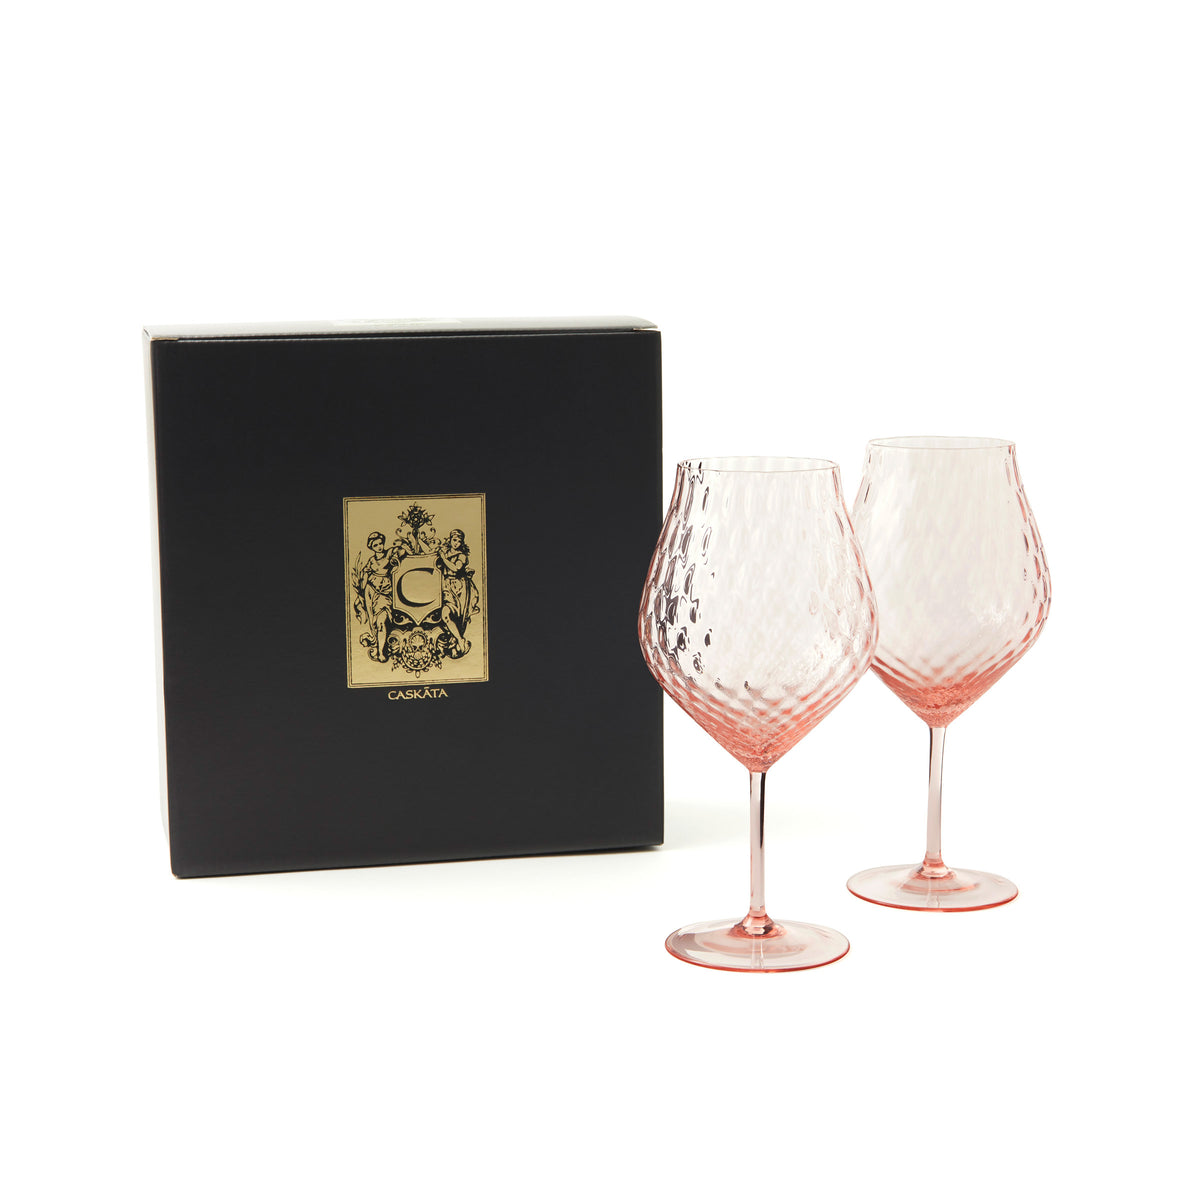 Phoebe rose pink mouth-blown optic crystal universal wine glasses from Caskata.